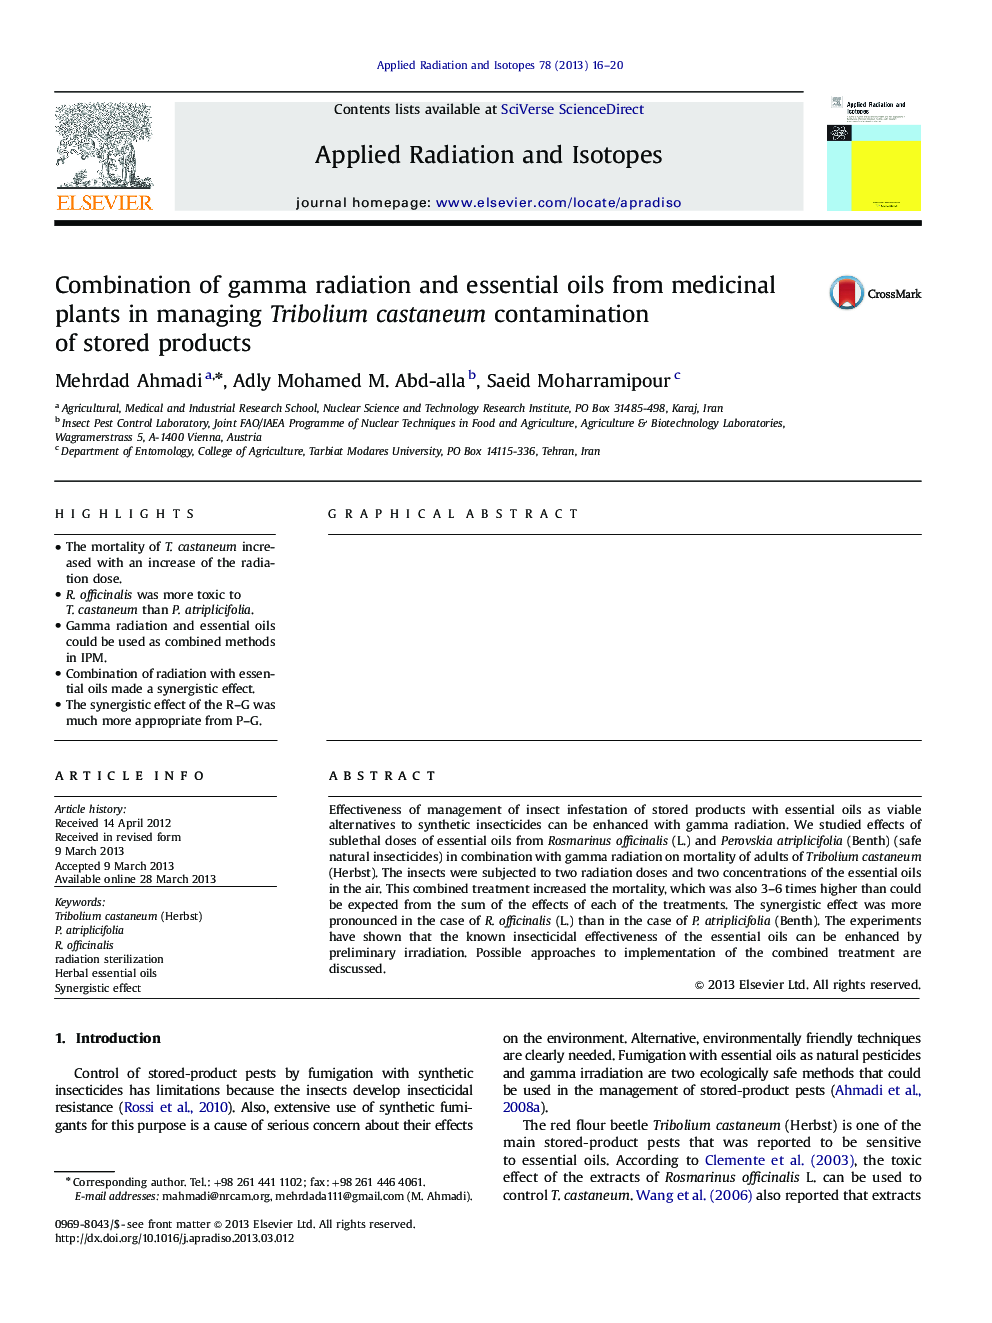 Combination of gamma radiation and essential oils from medicinal plants in managing Tribolium castaneum contamination of stored products